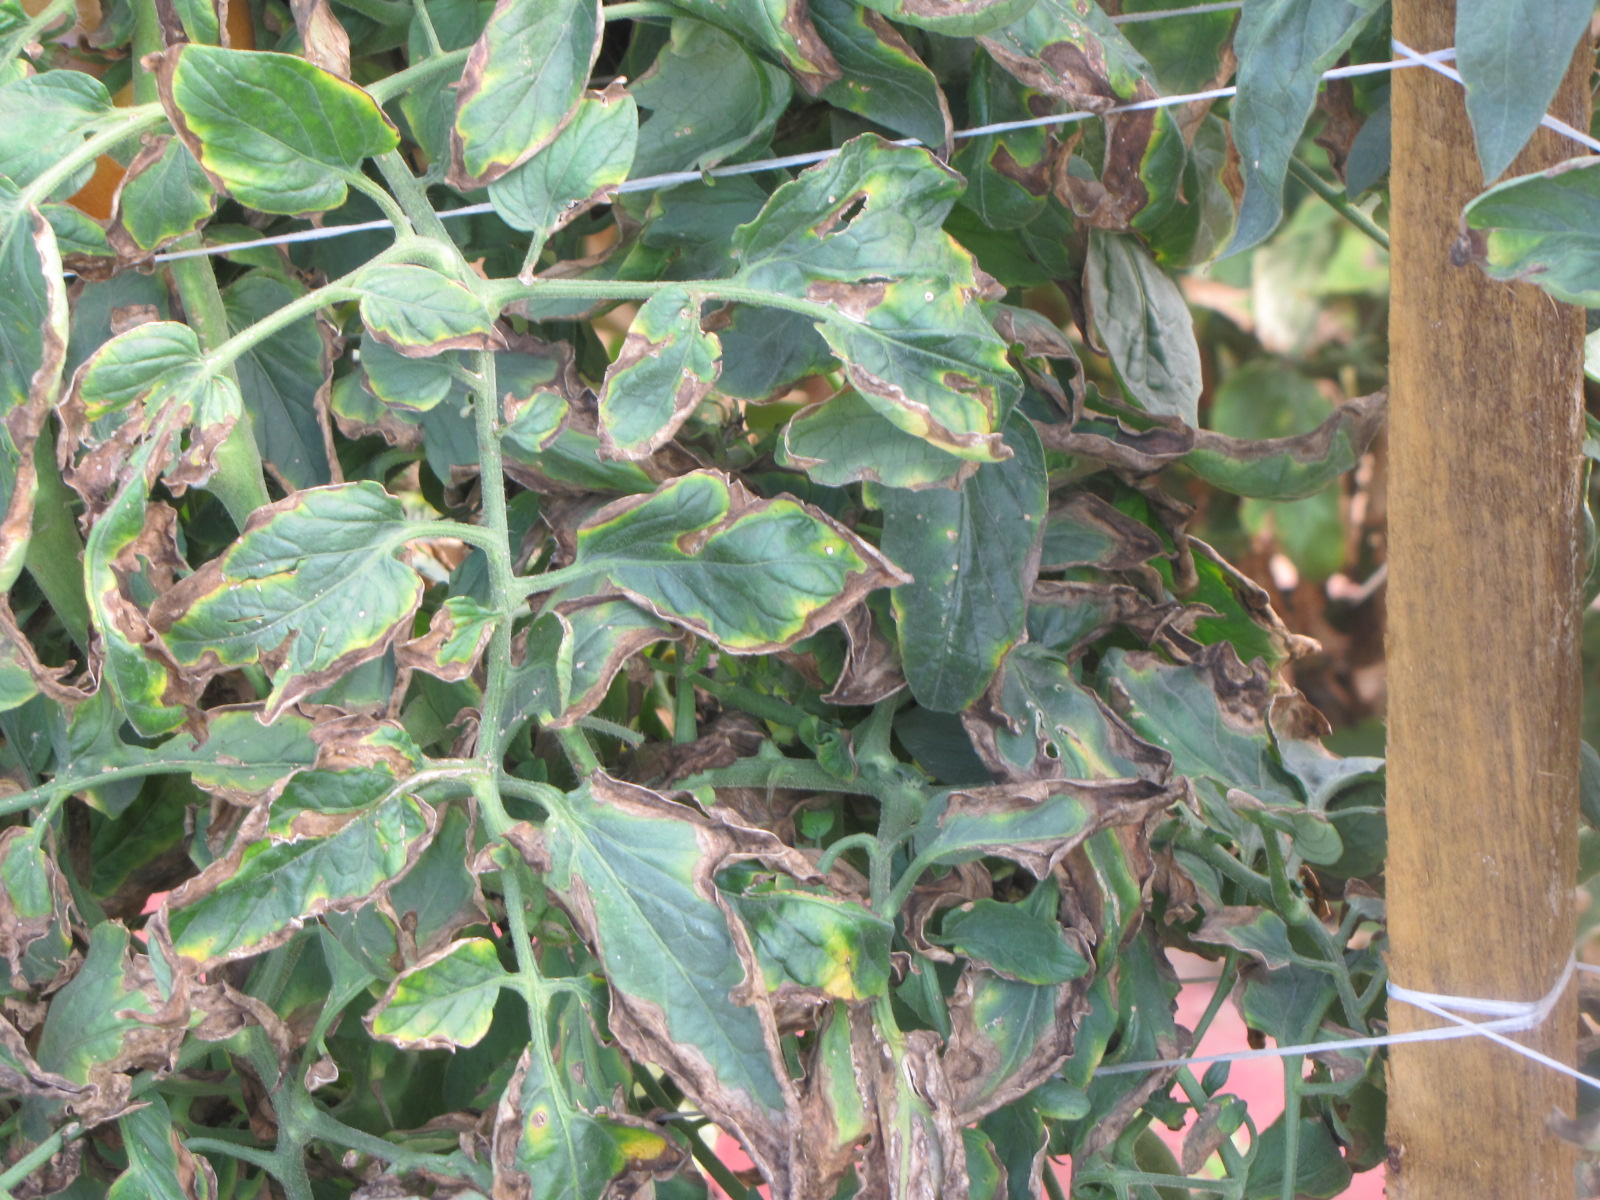 Figure 1. Necrosis and chlorosis on leaf margin, also known and ‘firing’, due to bacterial canker.